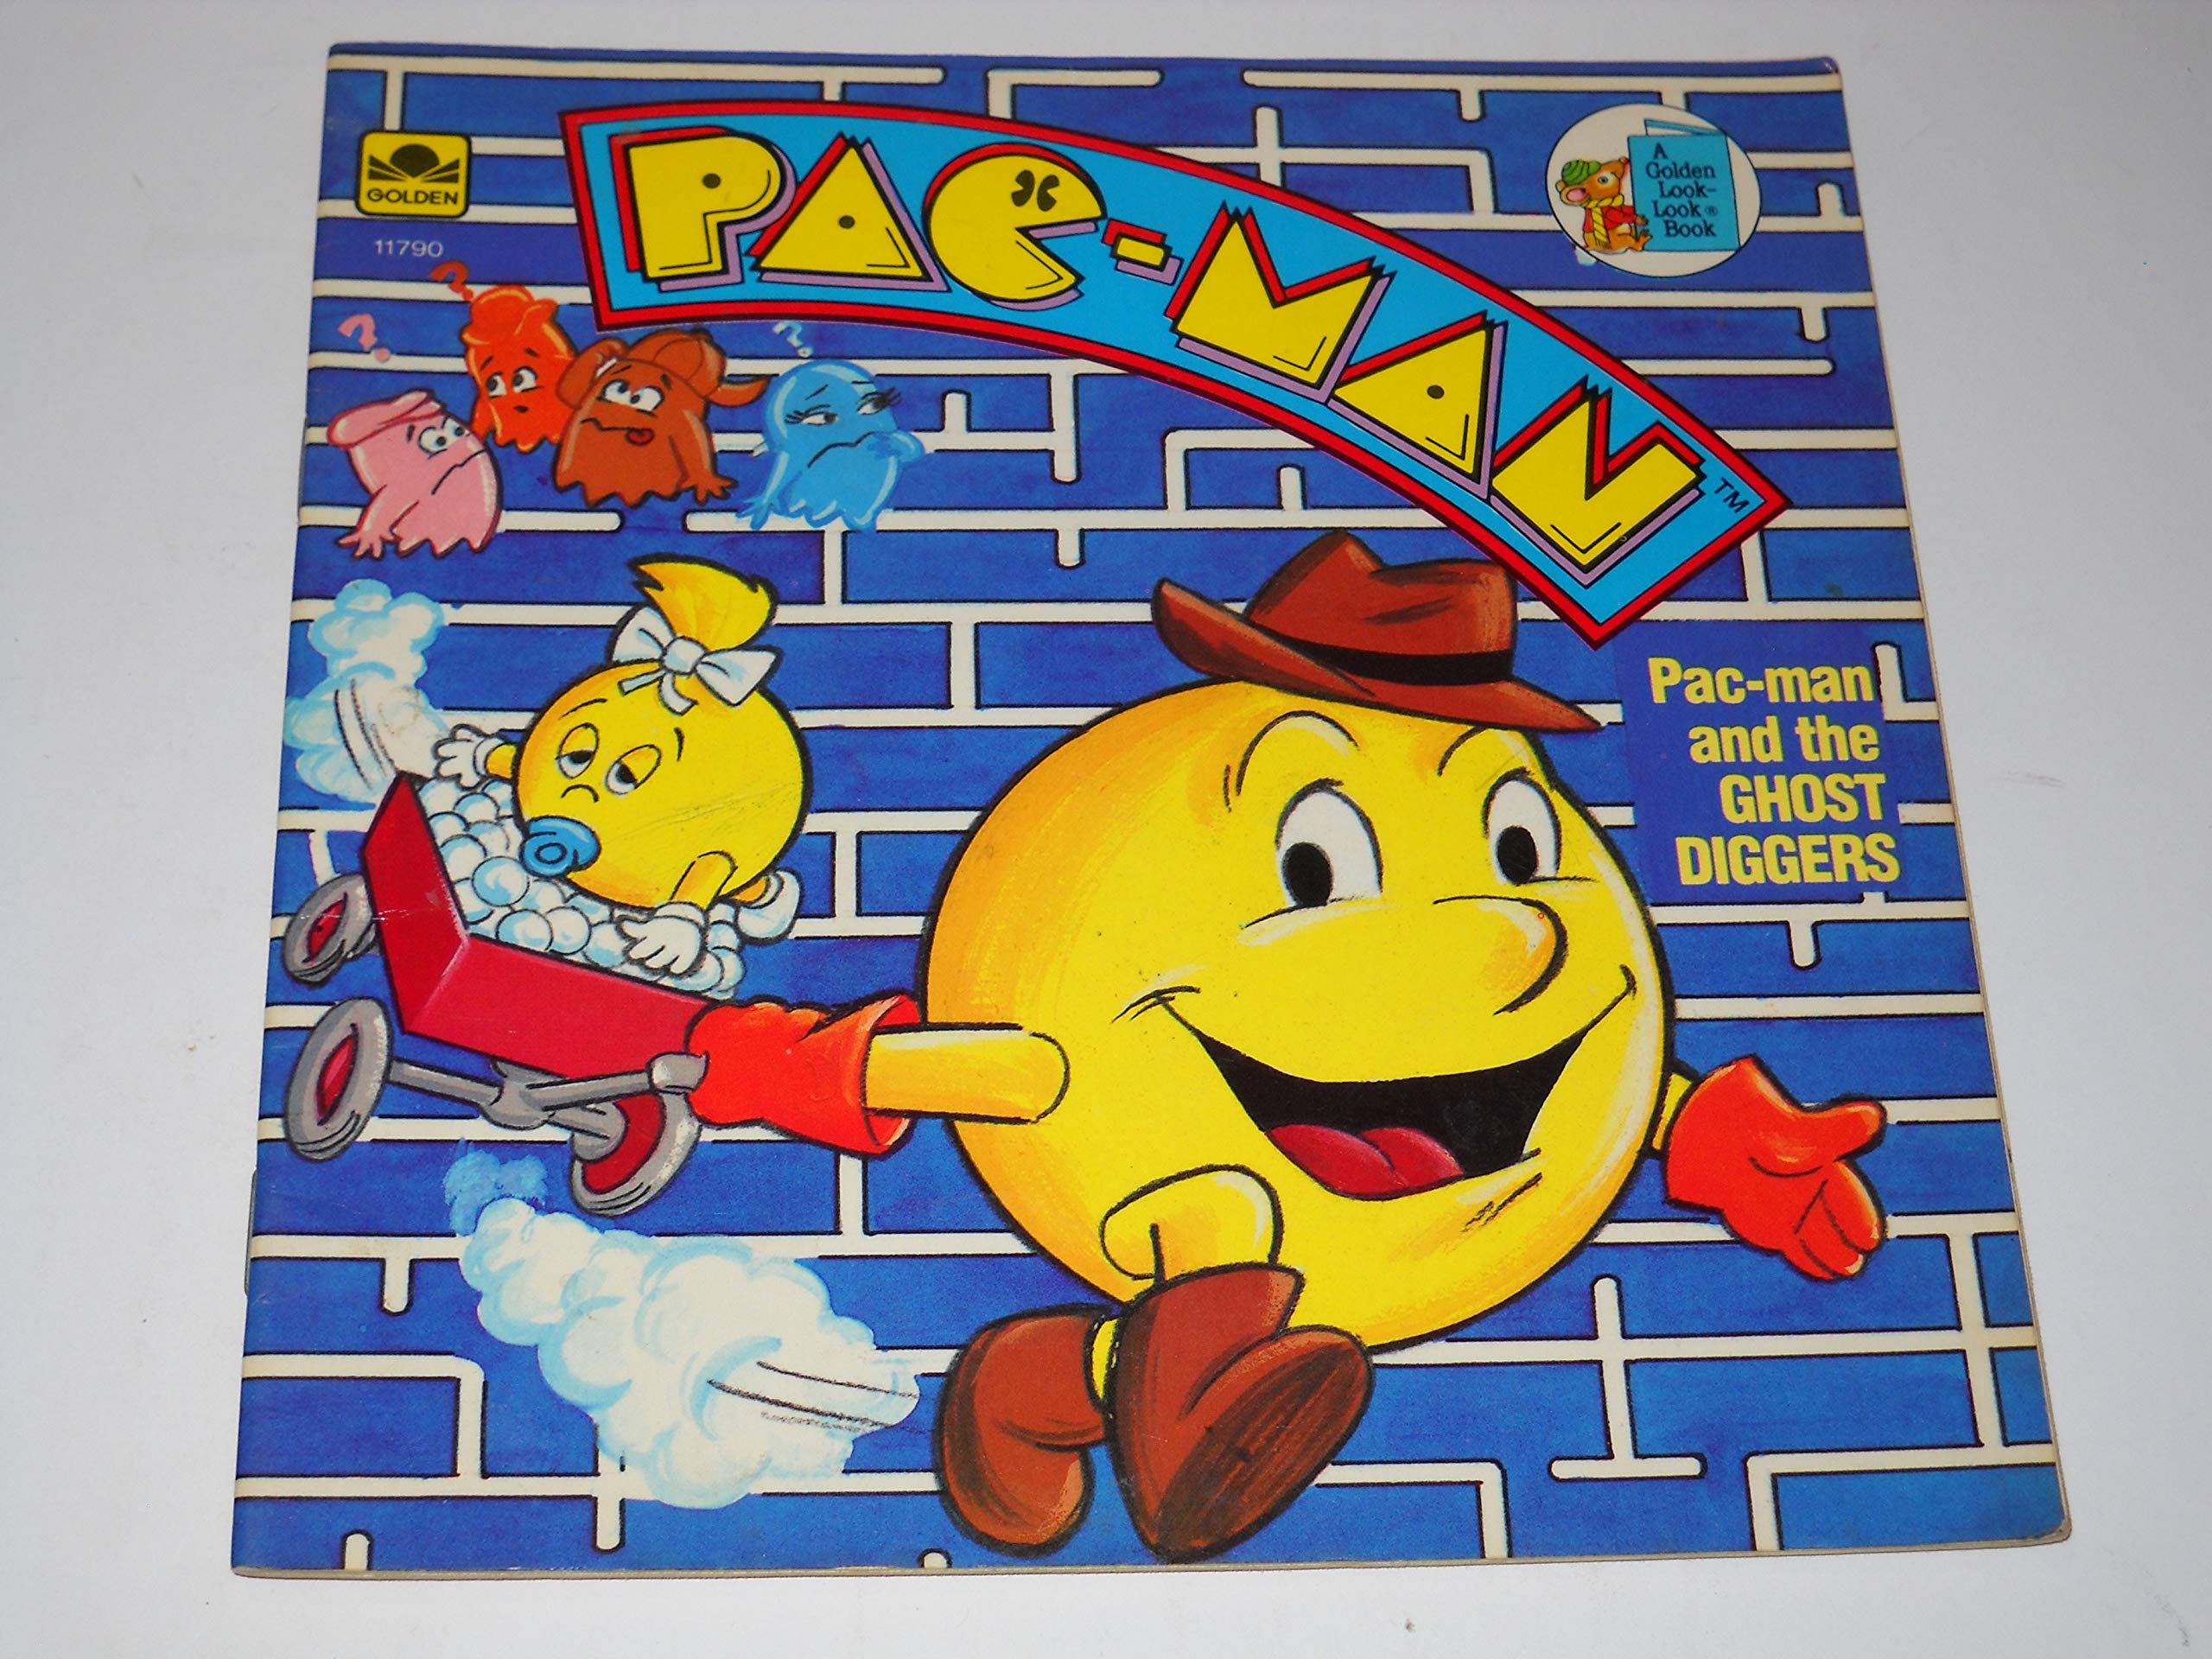 Frontlist | Just look at this amazing Pac-Man history book